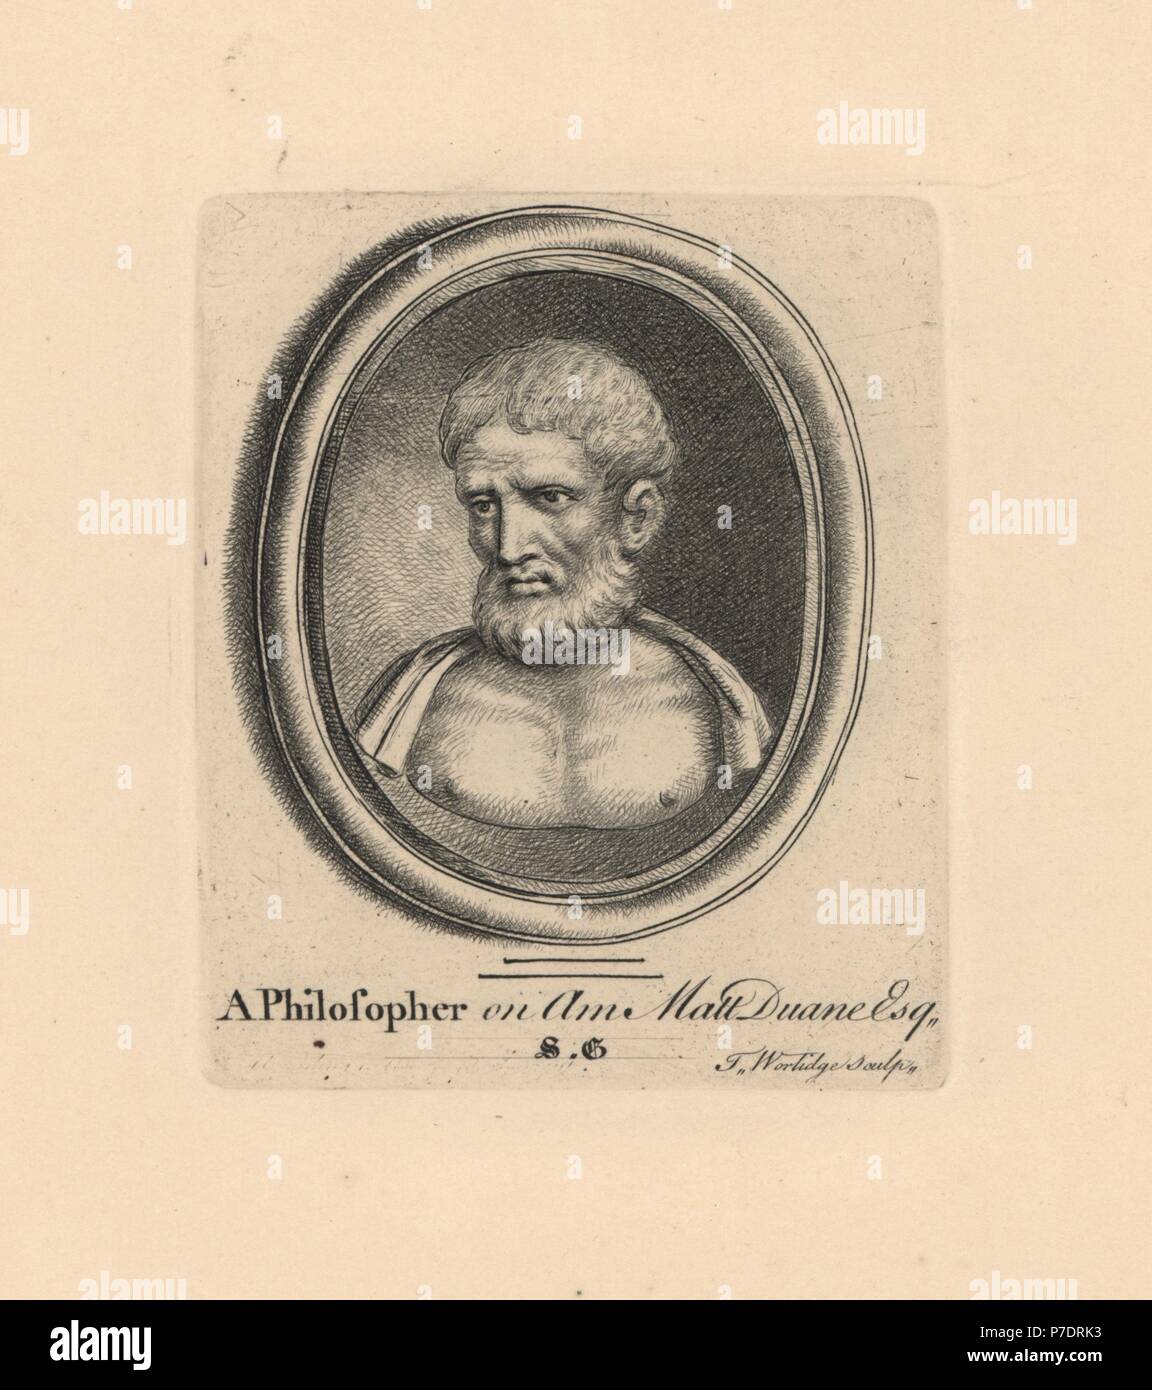 Portrait of an ancient Greek Philosopher on amethyst from Matthew Duane's collection. Copperplate engraving by Thomas Worlidge from James Vallentin's One Hundred and Eight Engravings from Antique Gems, 1863. Stock Photo